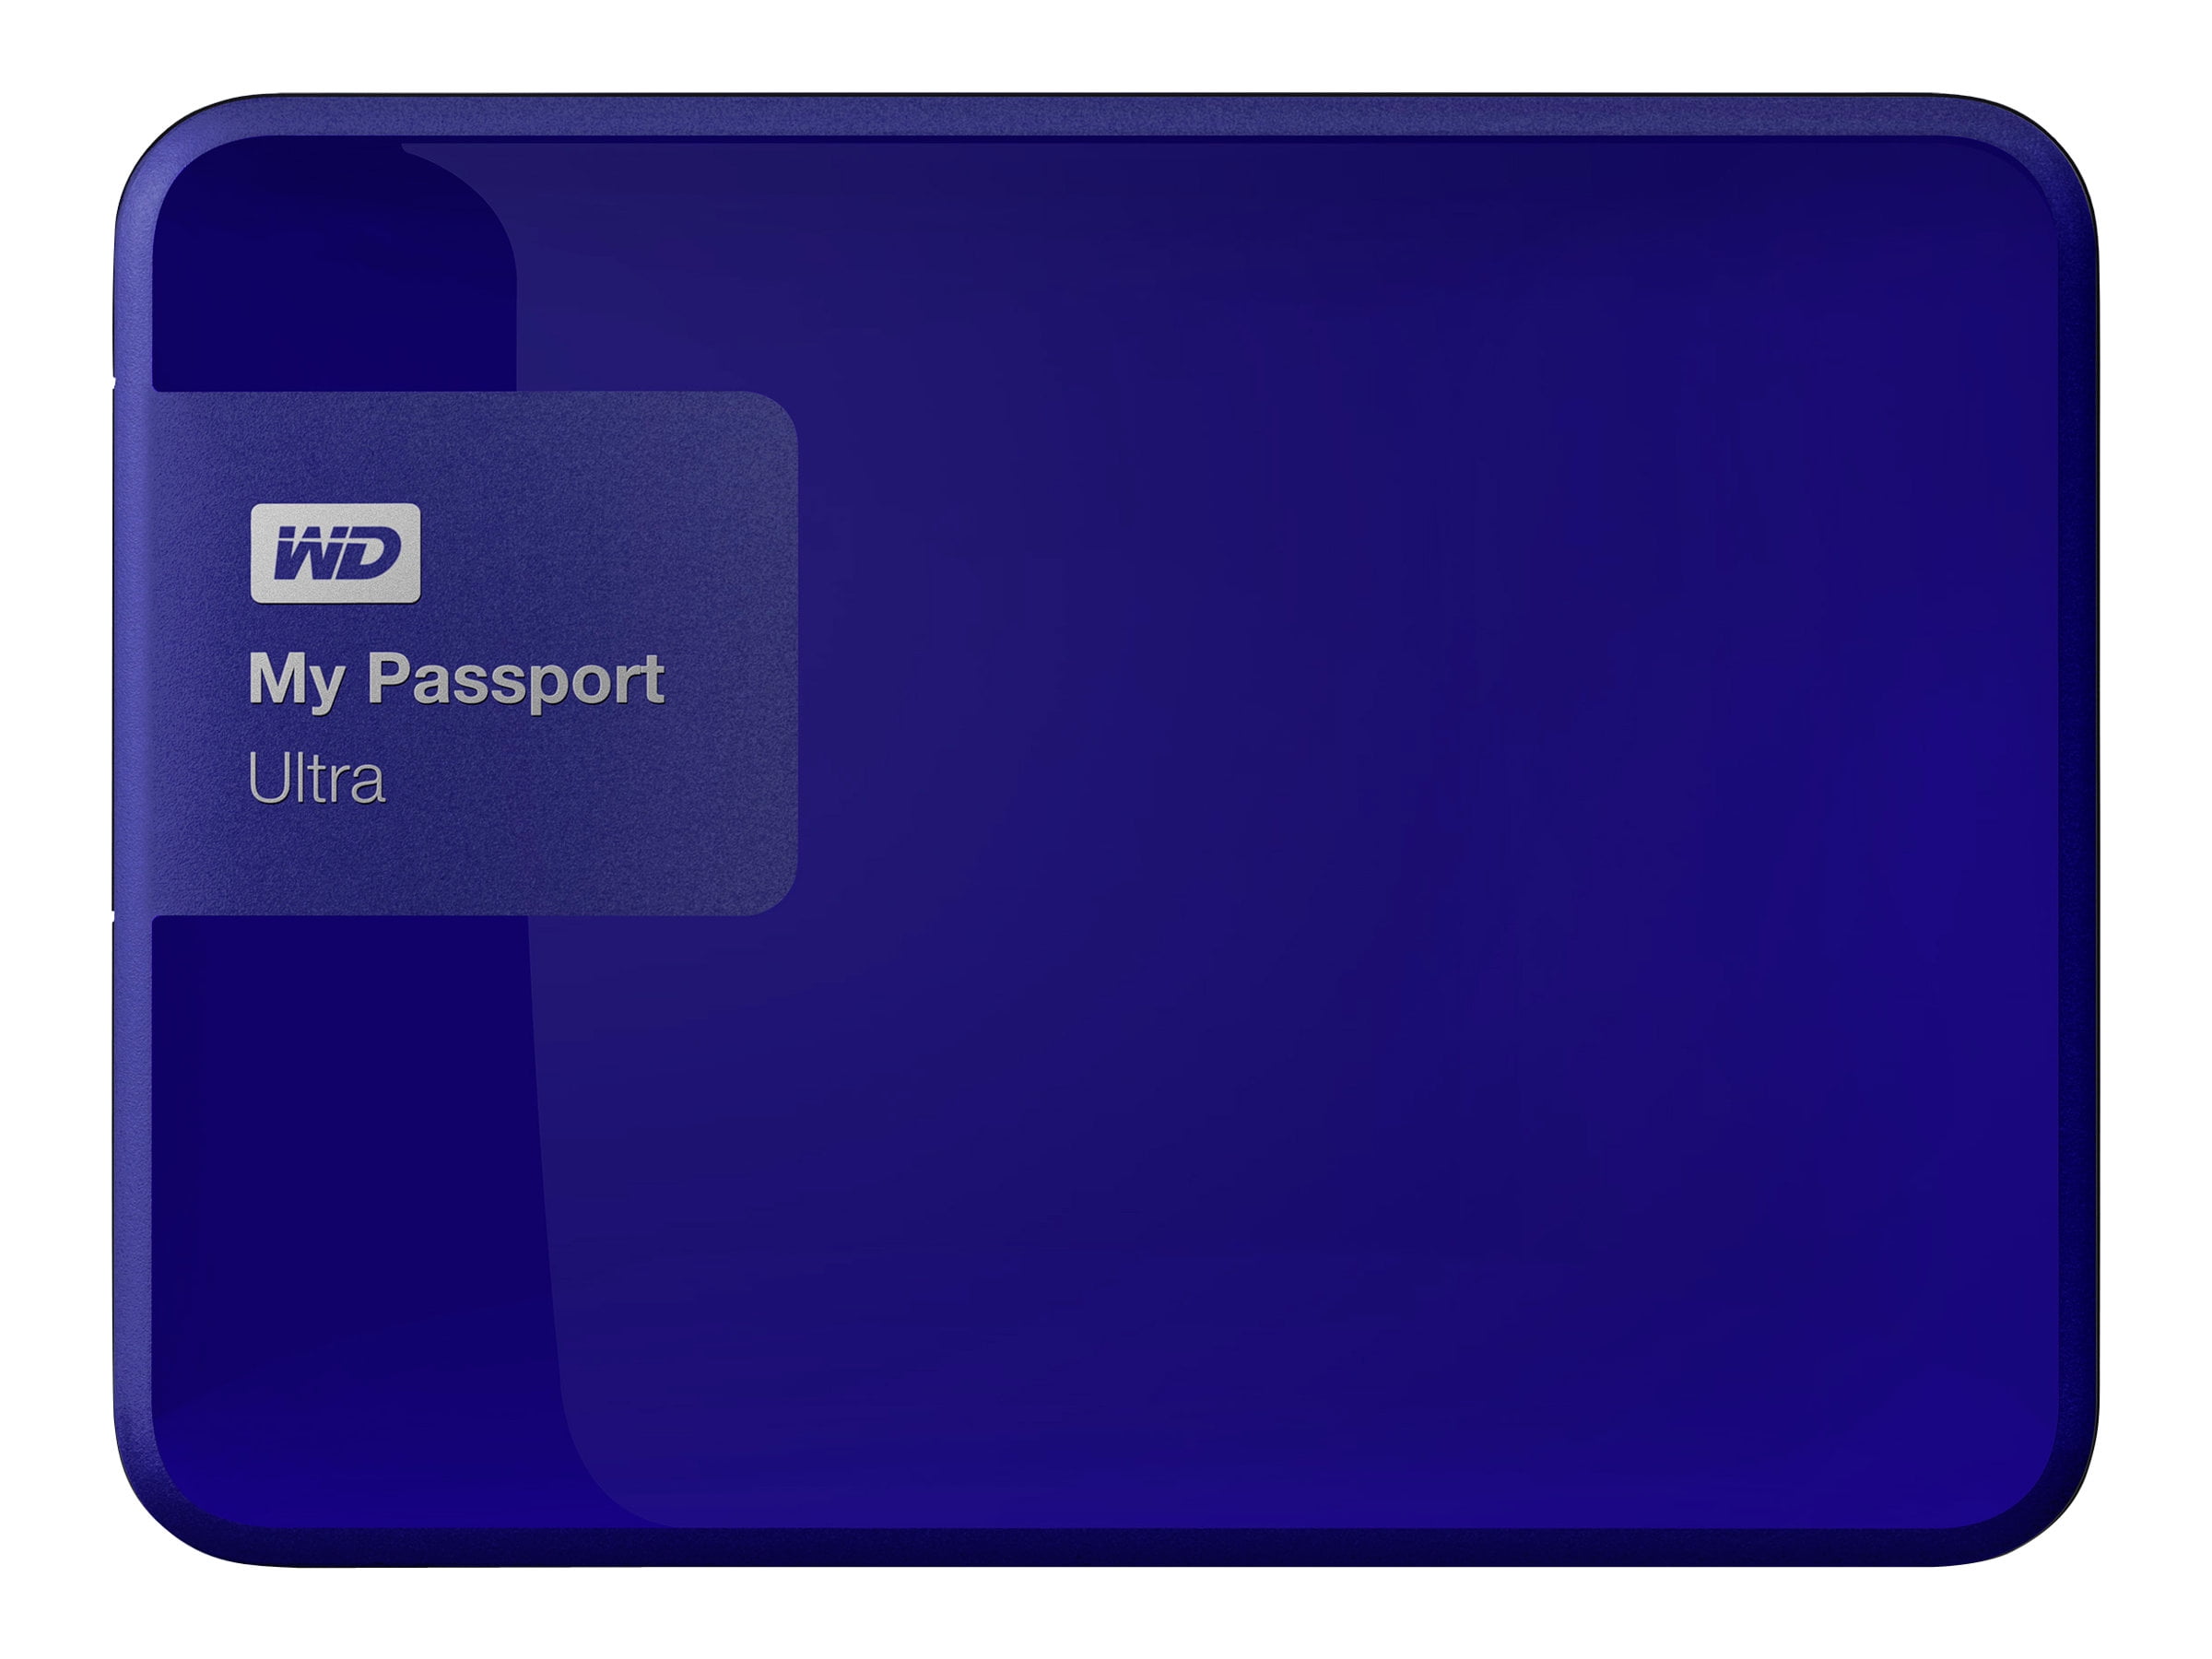 WD My Passport Ultra 1TB USB 3.0 Secure portable drive with auto